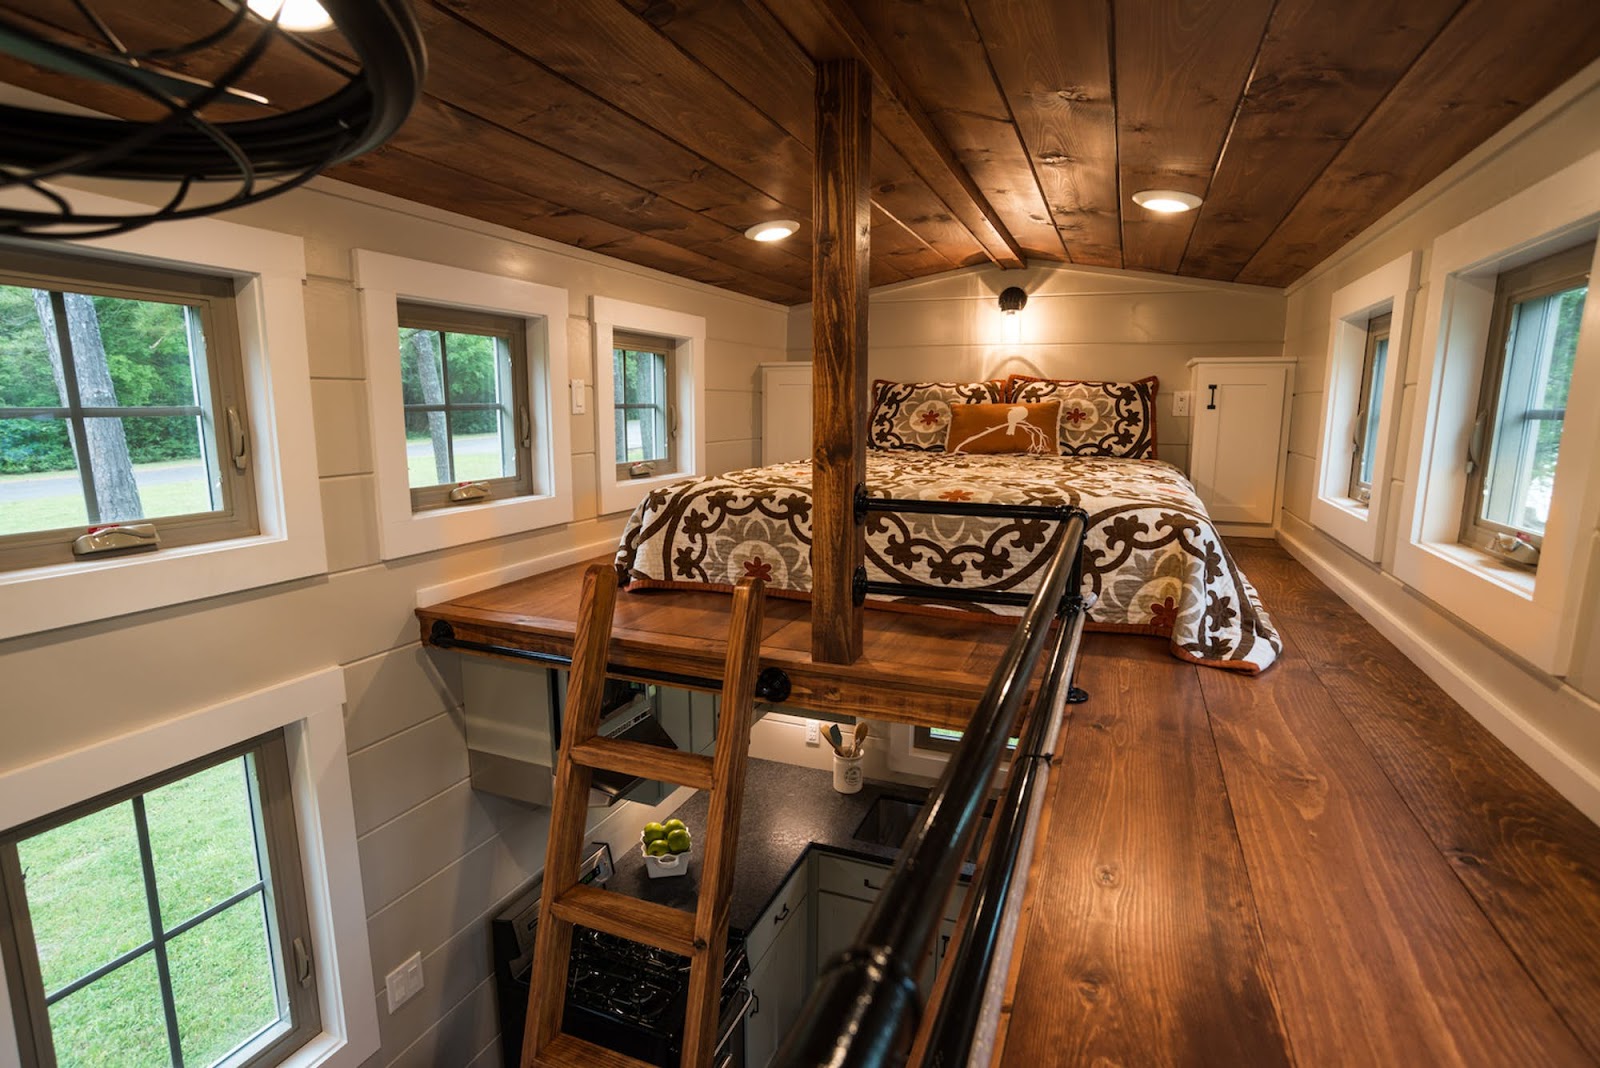 TINY HOUSE TOWN The Retreat From Timbercraft Tiny Homes